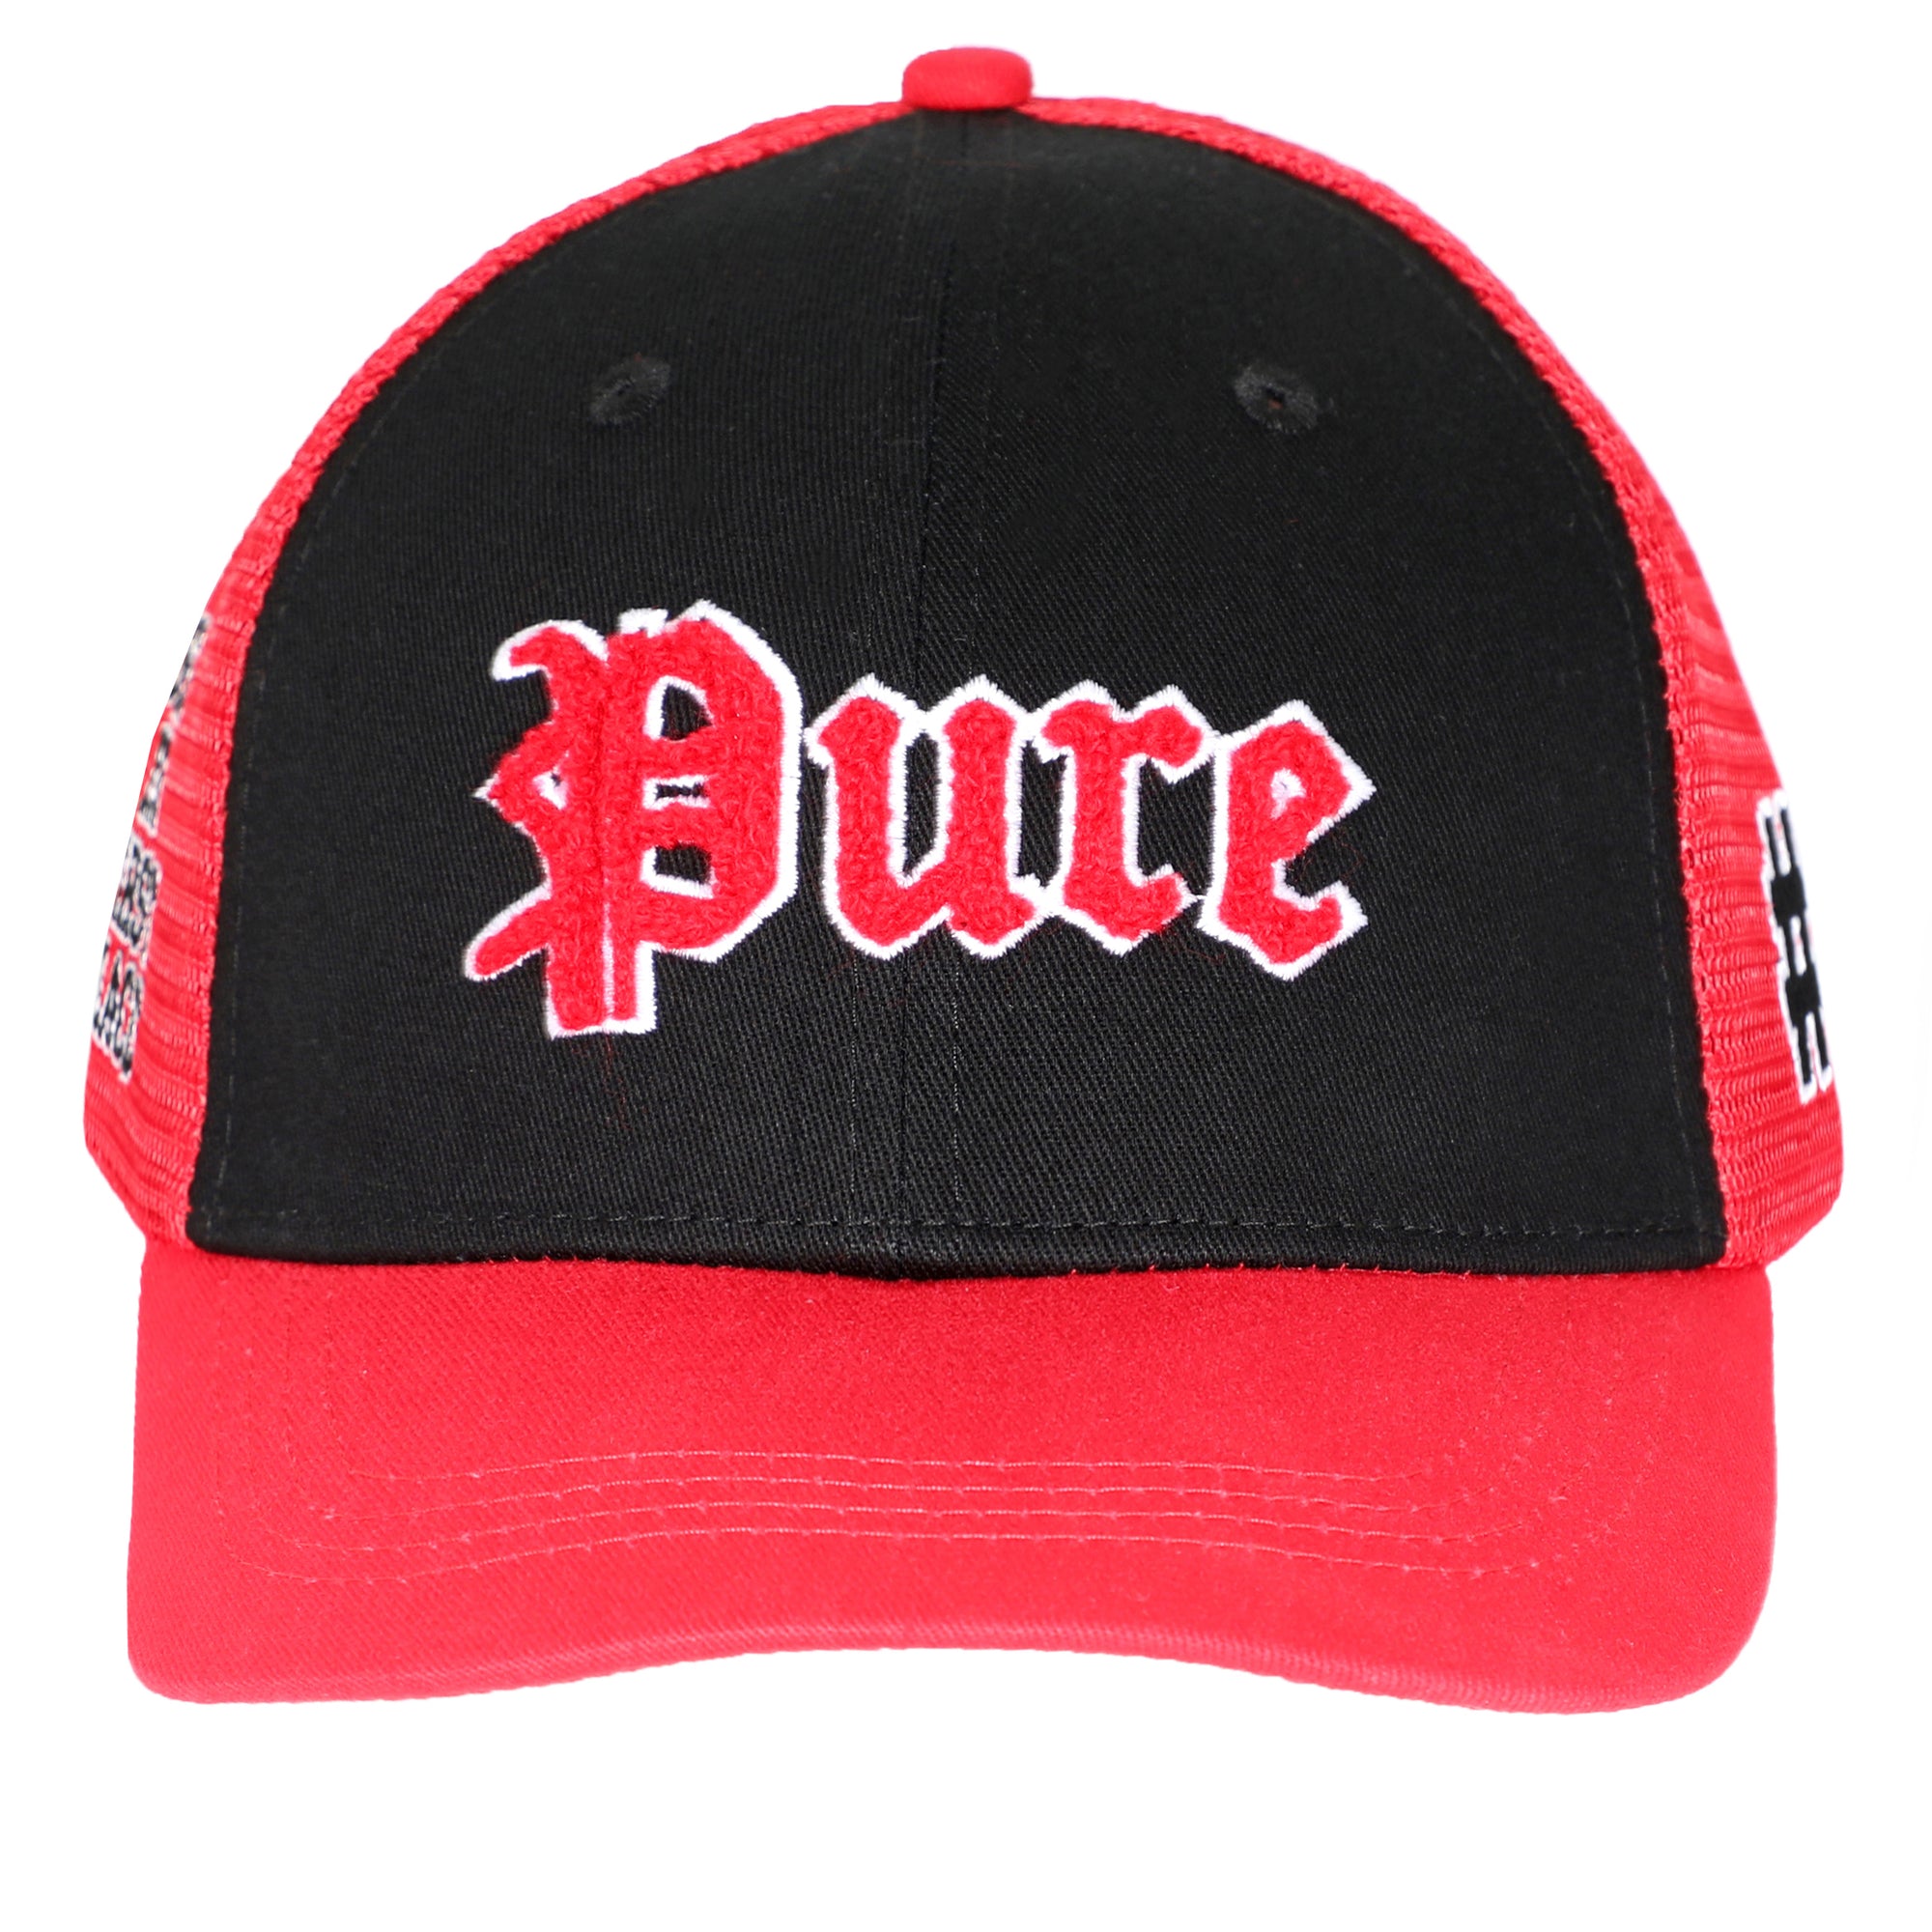 PURE CHENILLE SNAPBACK - RED AND BLACK